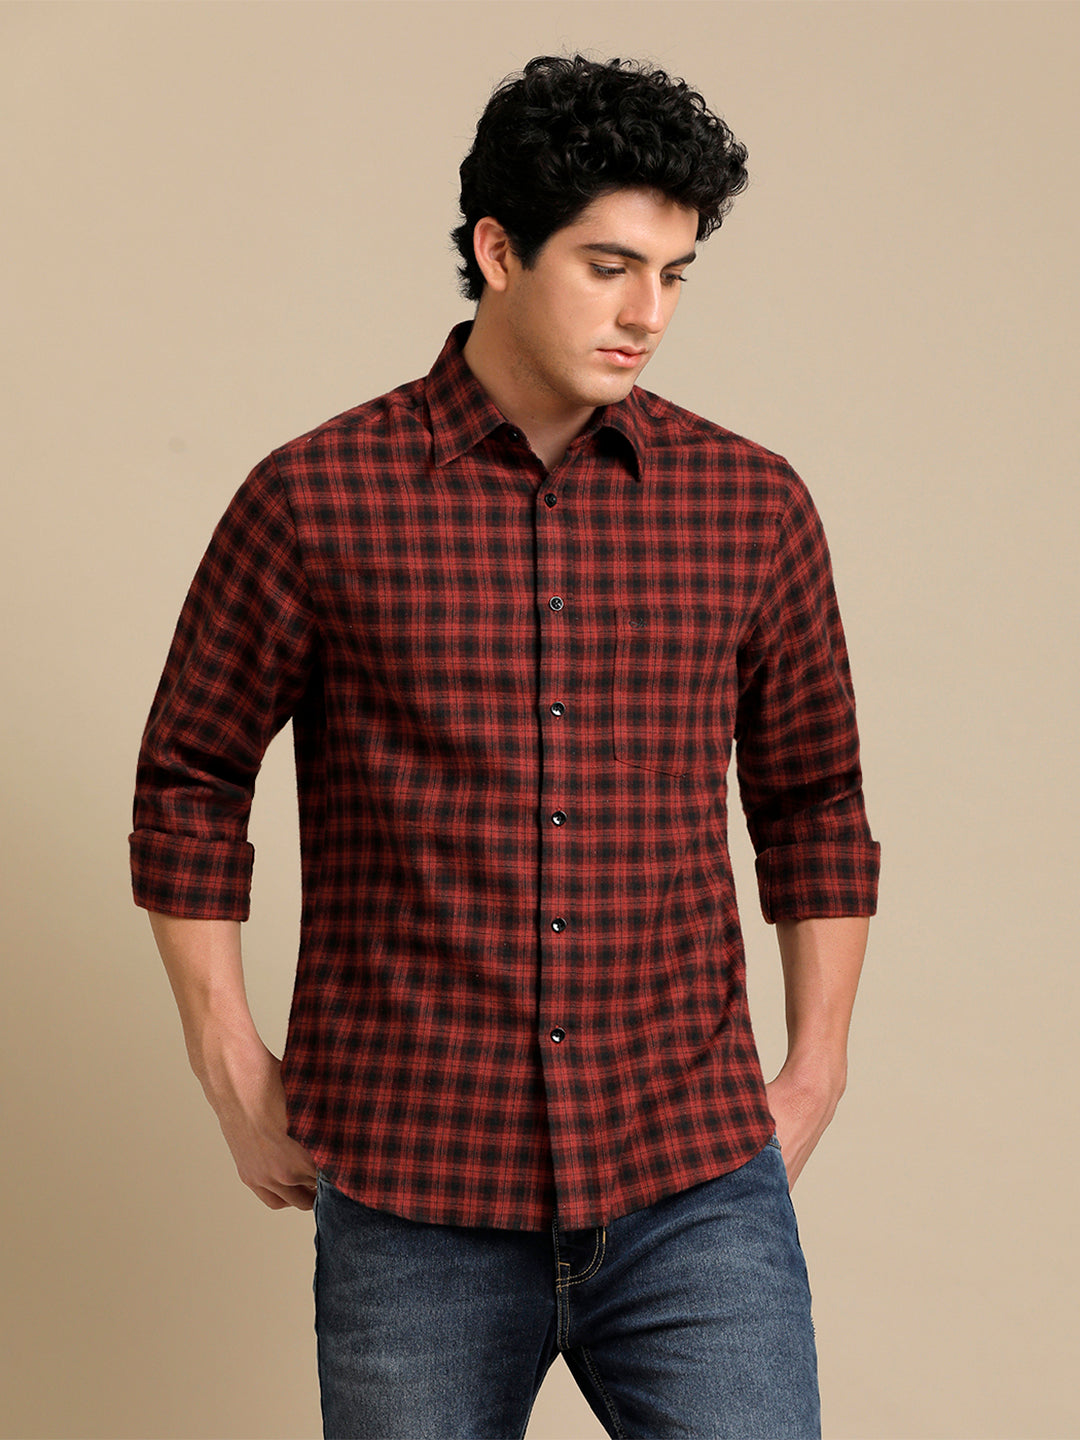 Aldeno Mens Regular Fit Check Red/Black Casual Cotton Shirt (CHERED)